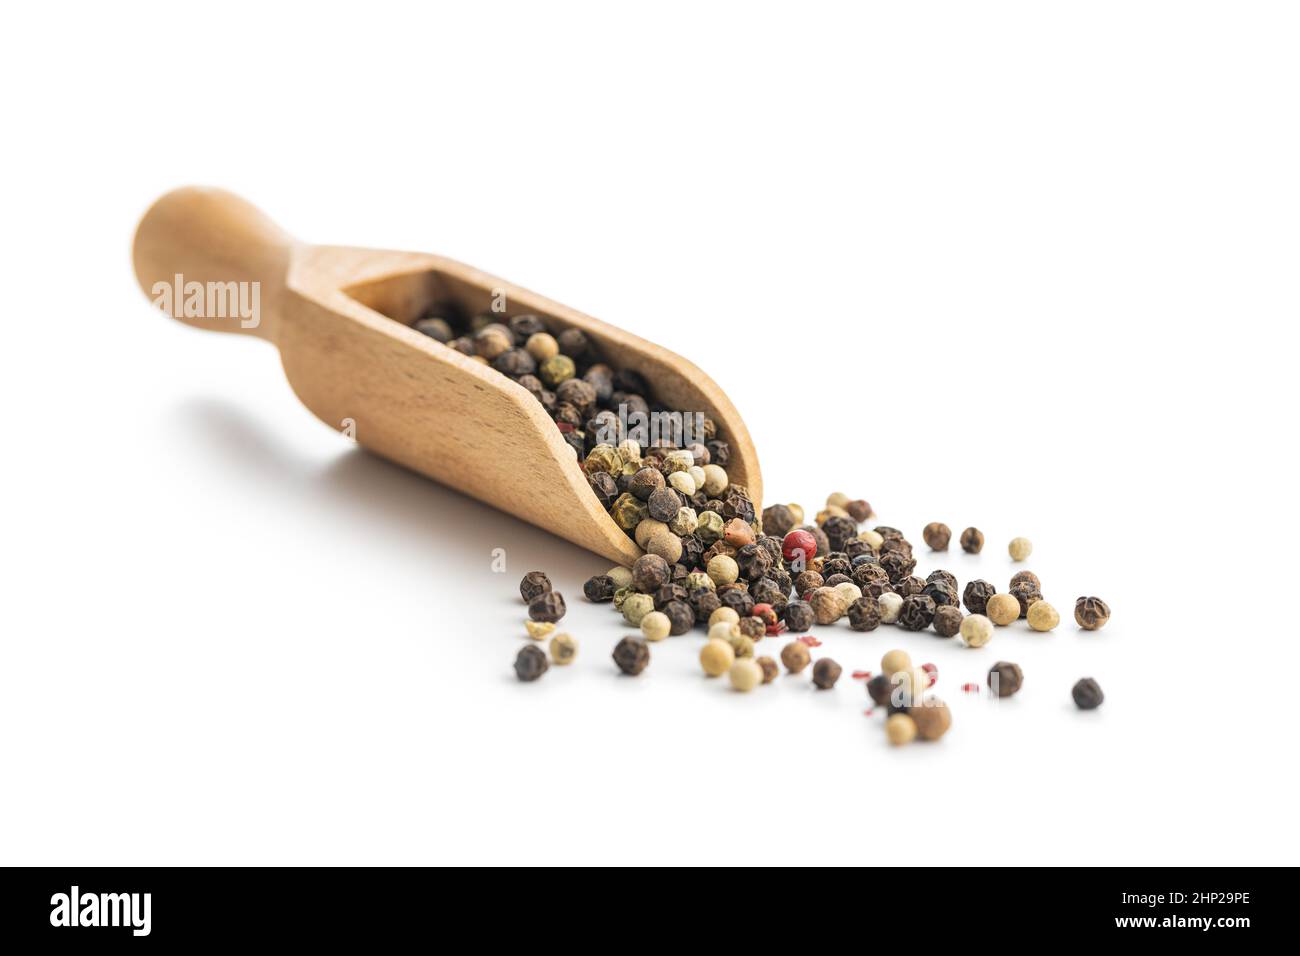 https://c8.alamy.com/comp/2HP29PE/whole-pepper-in-wooden-scoop-isolated-on-white-backgrund-2HP29PE.jpg